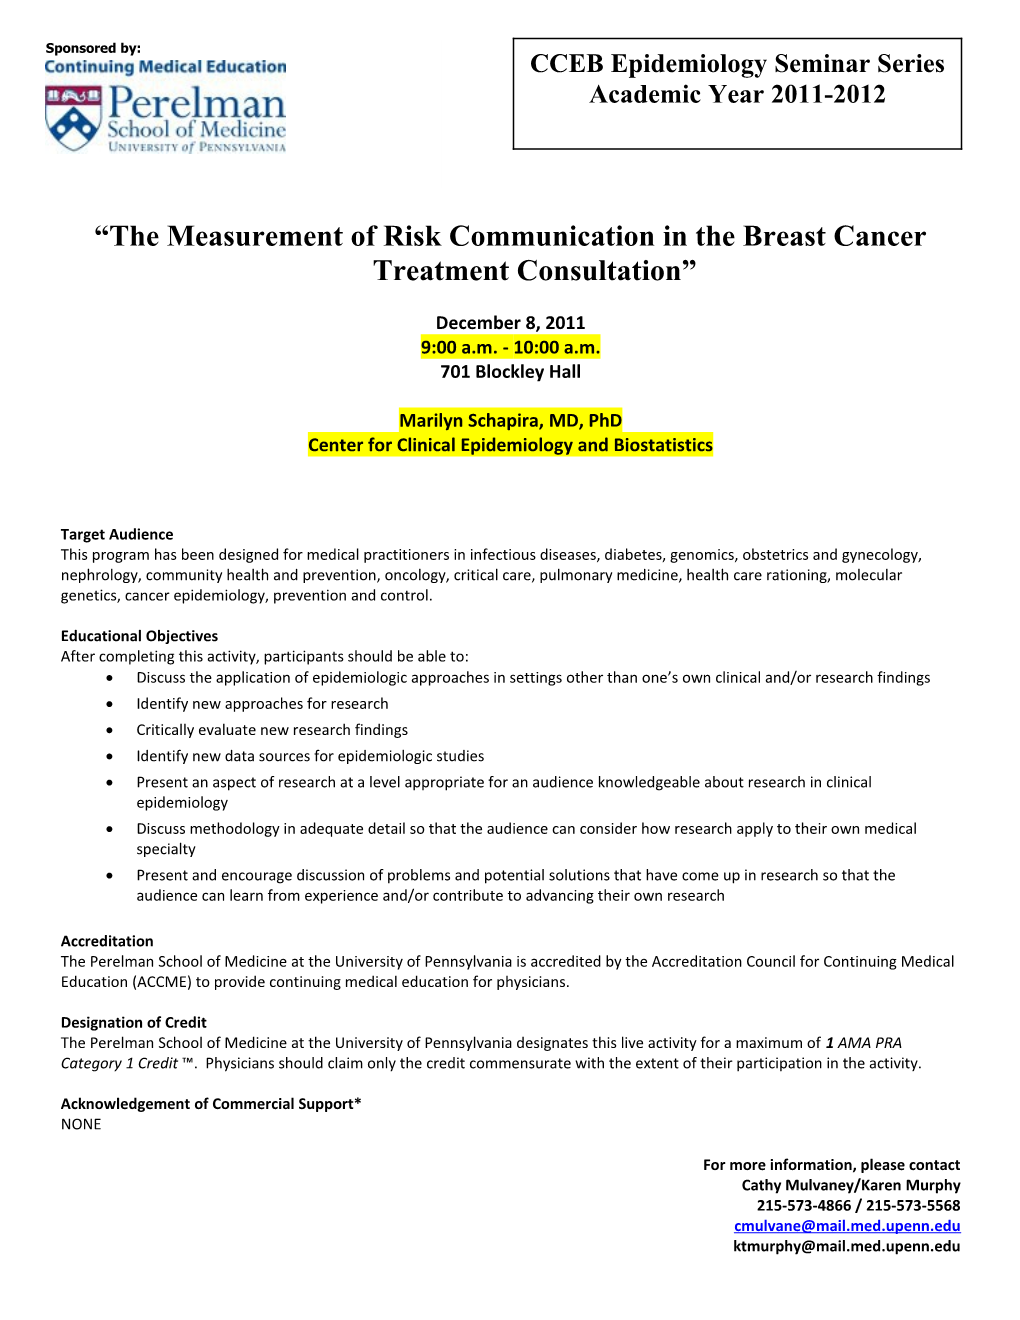 The Measurement of Risk Communication in the Breast Cancer Treatment Consultation